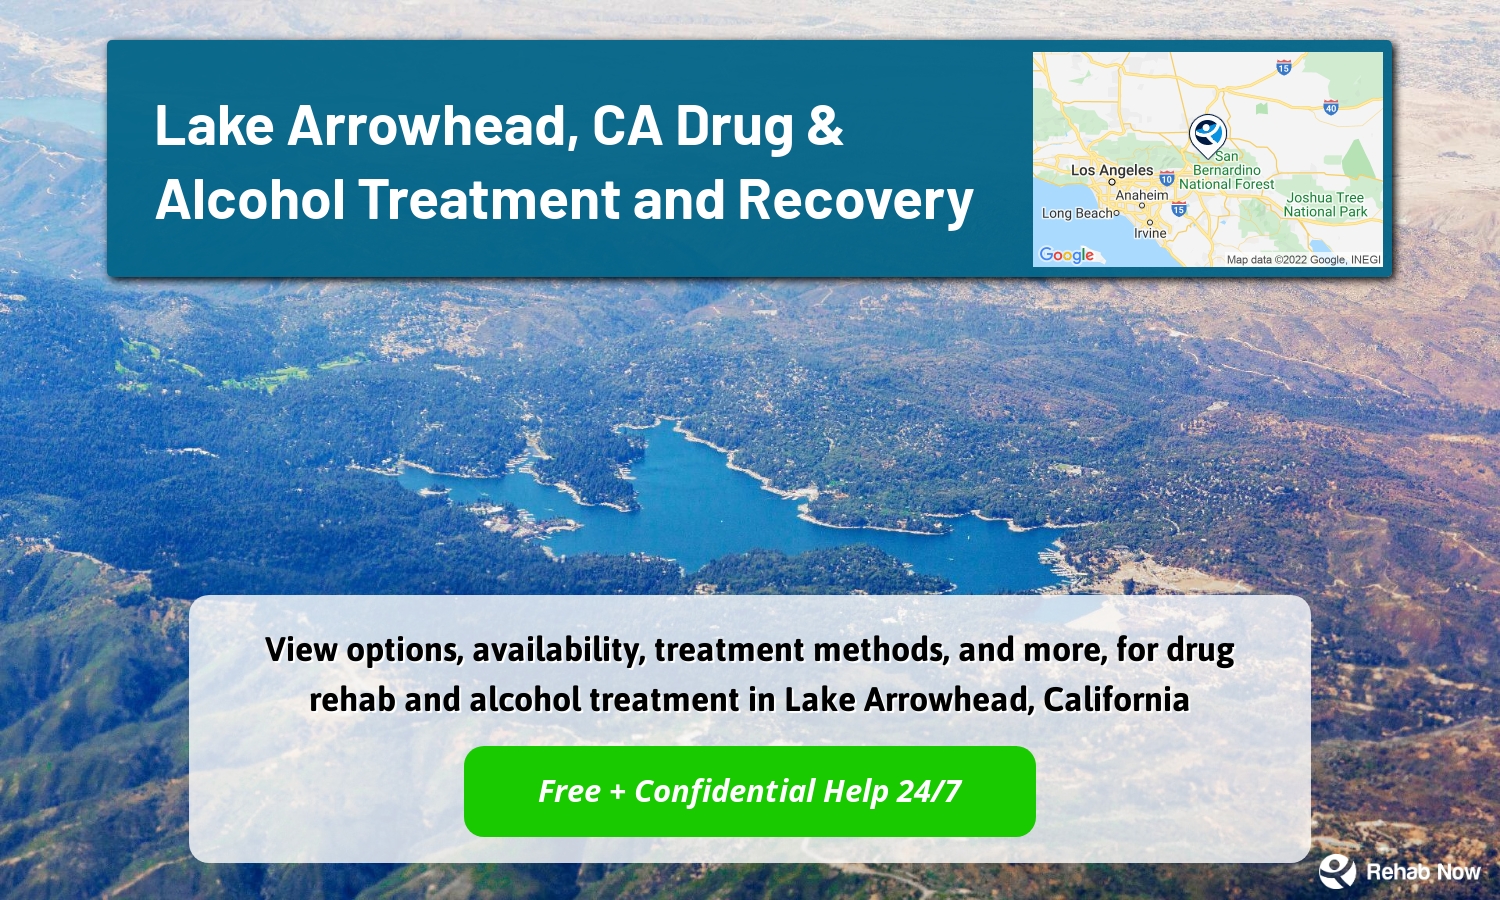 View options, availability, treatment methods, and more, for drug rehab and alcohol treatment in Lake Arrowhead, California